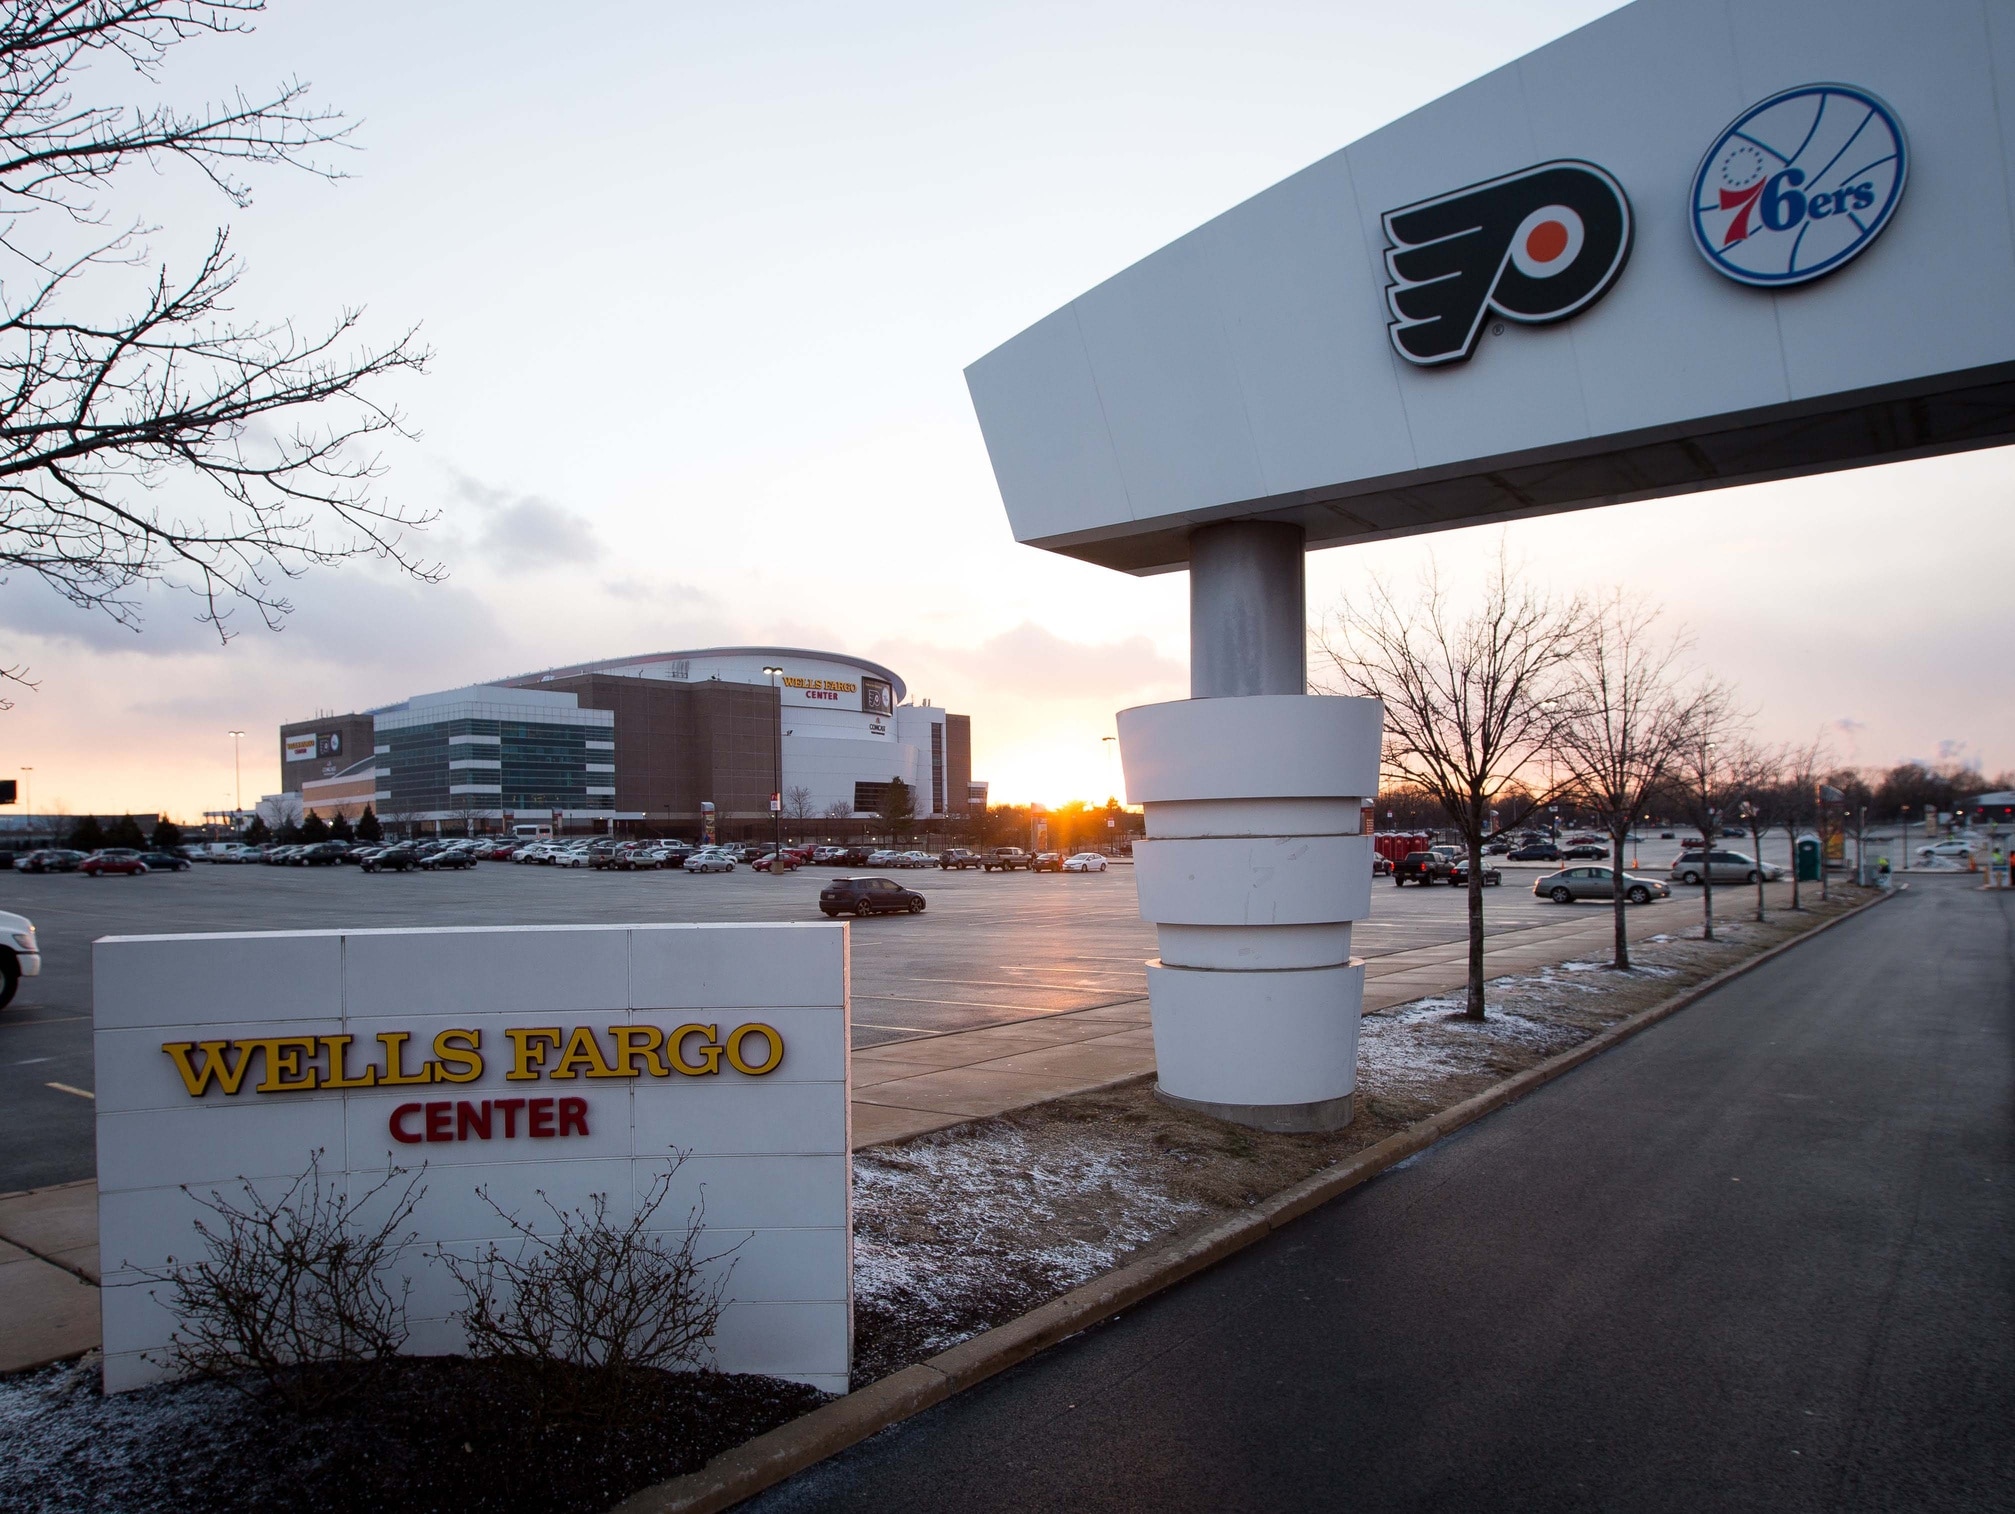 City of Philadelphia to Require COVID Vaccination for Wells Fargo Center Attendance